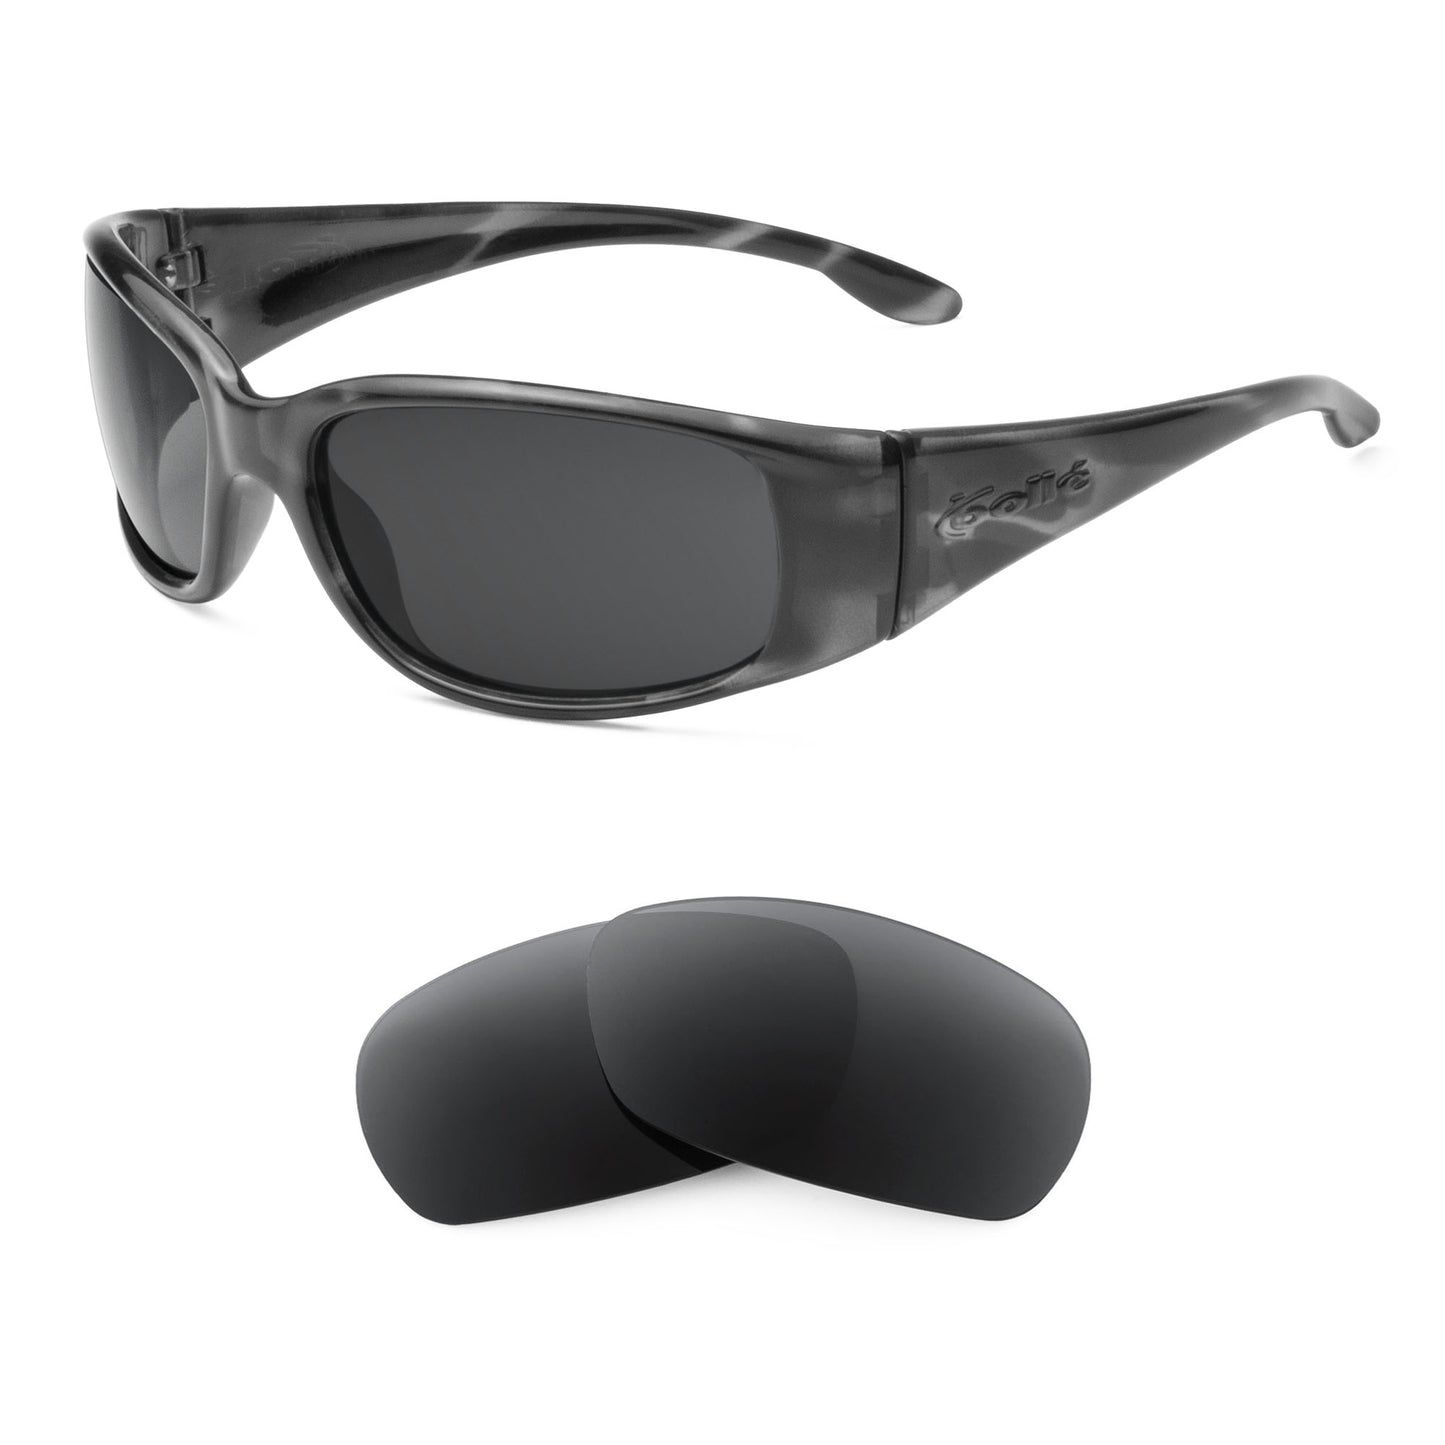 Bolle Habu sunglasses with replacement lenses